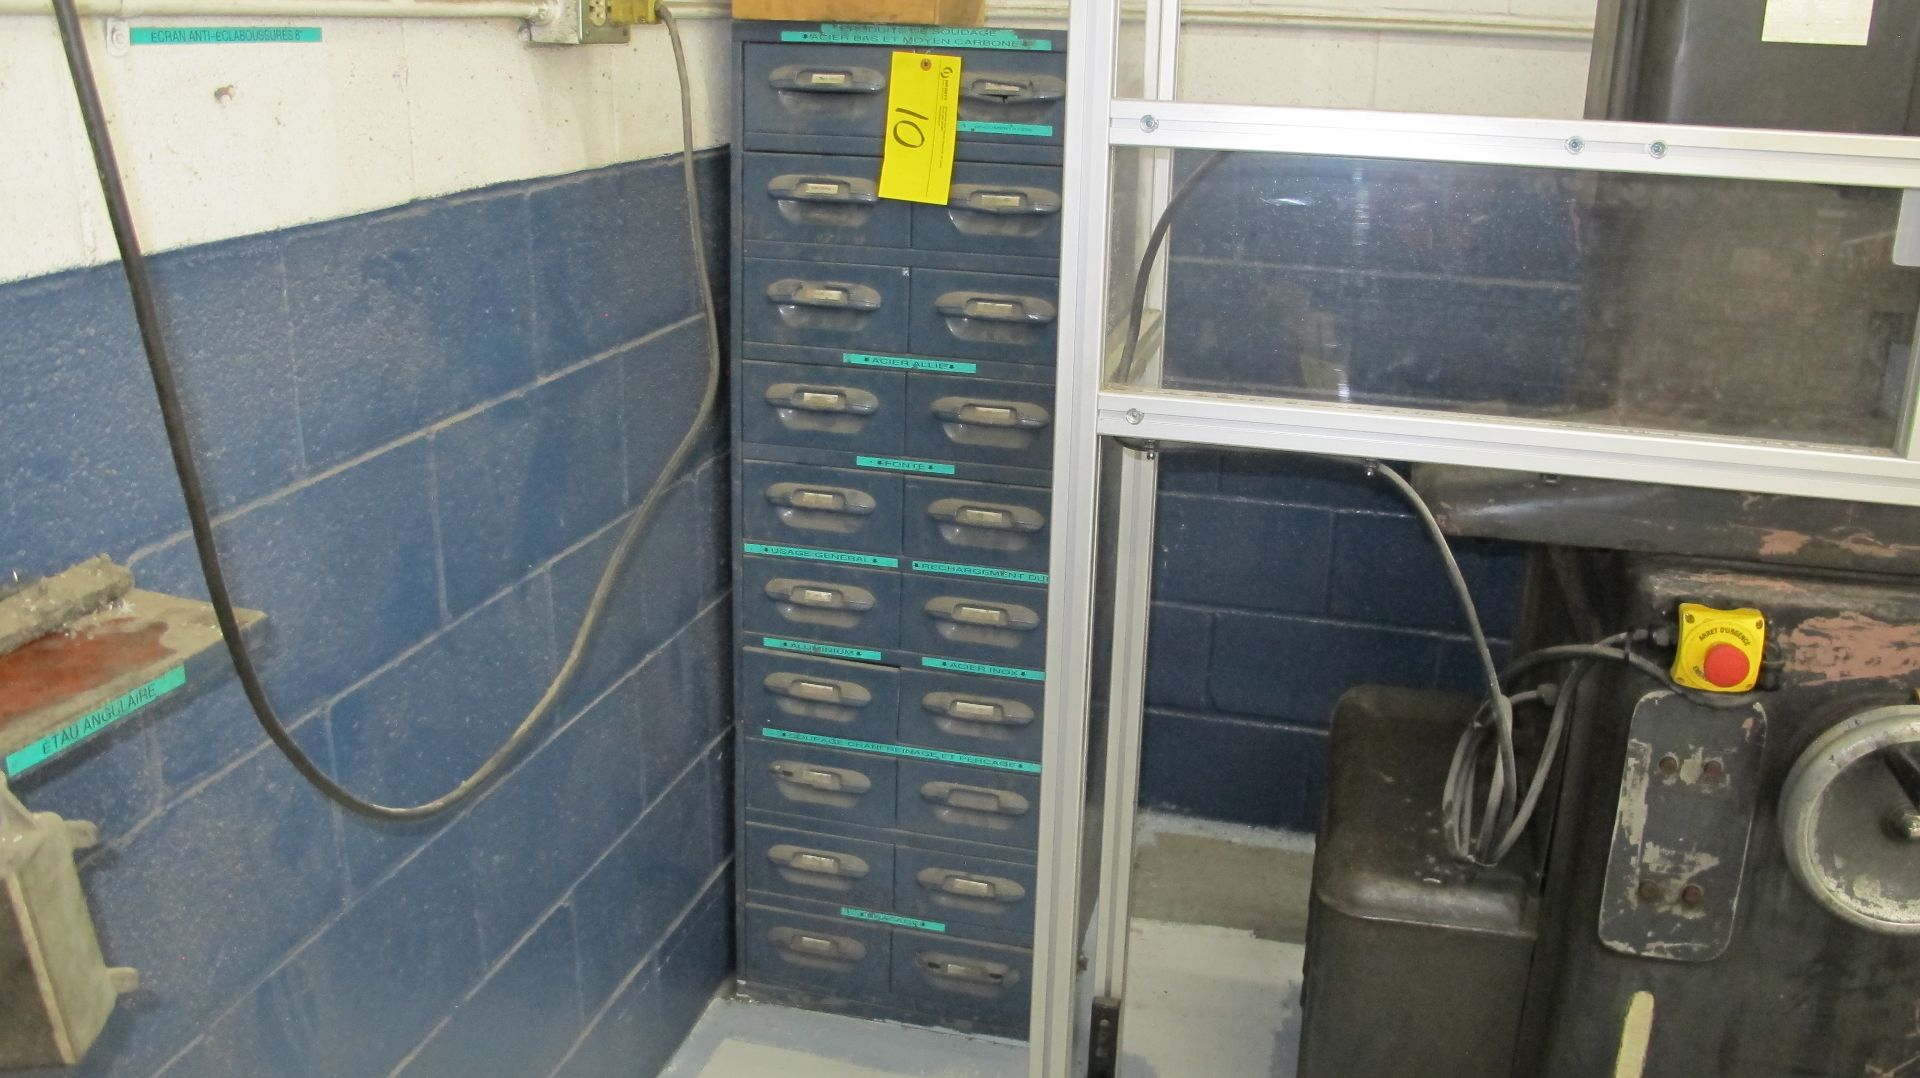 LOT OF WELDING ELECTRODES IN 10-LEVEL STORAGE CABINET AND WELDING SUPPLIES IN 2ND 10-LEVEL STORAGE